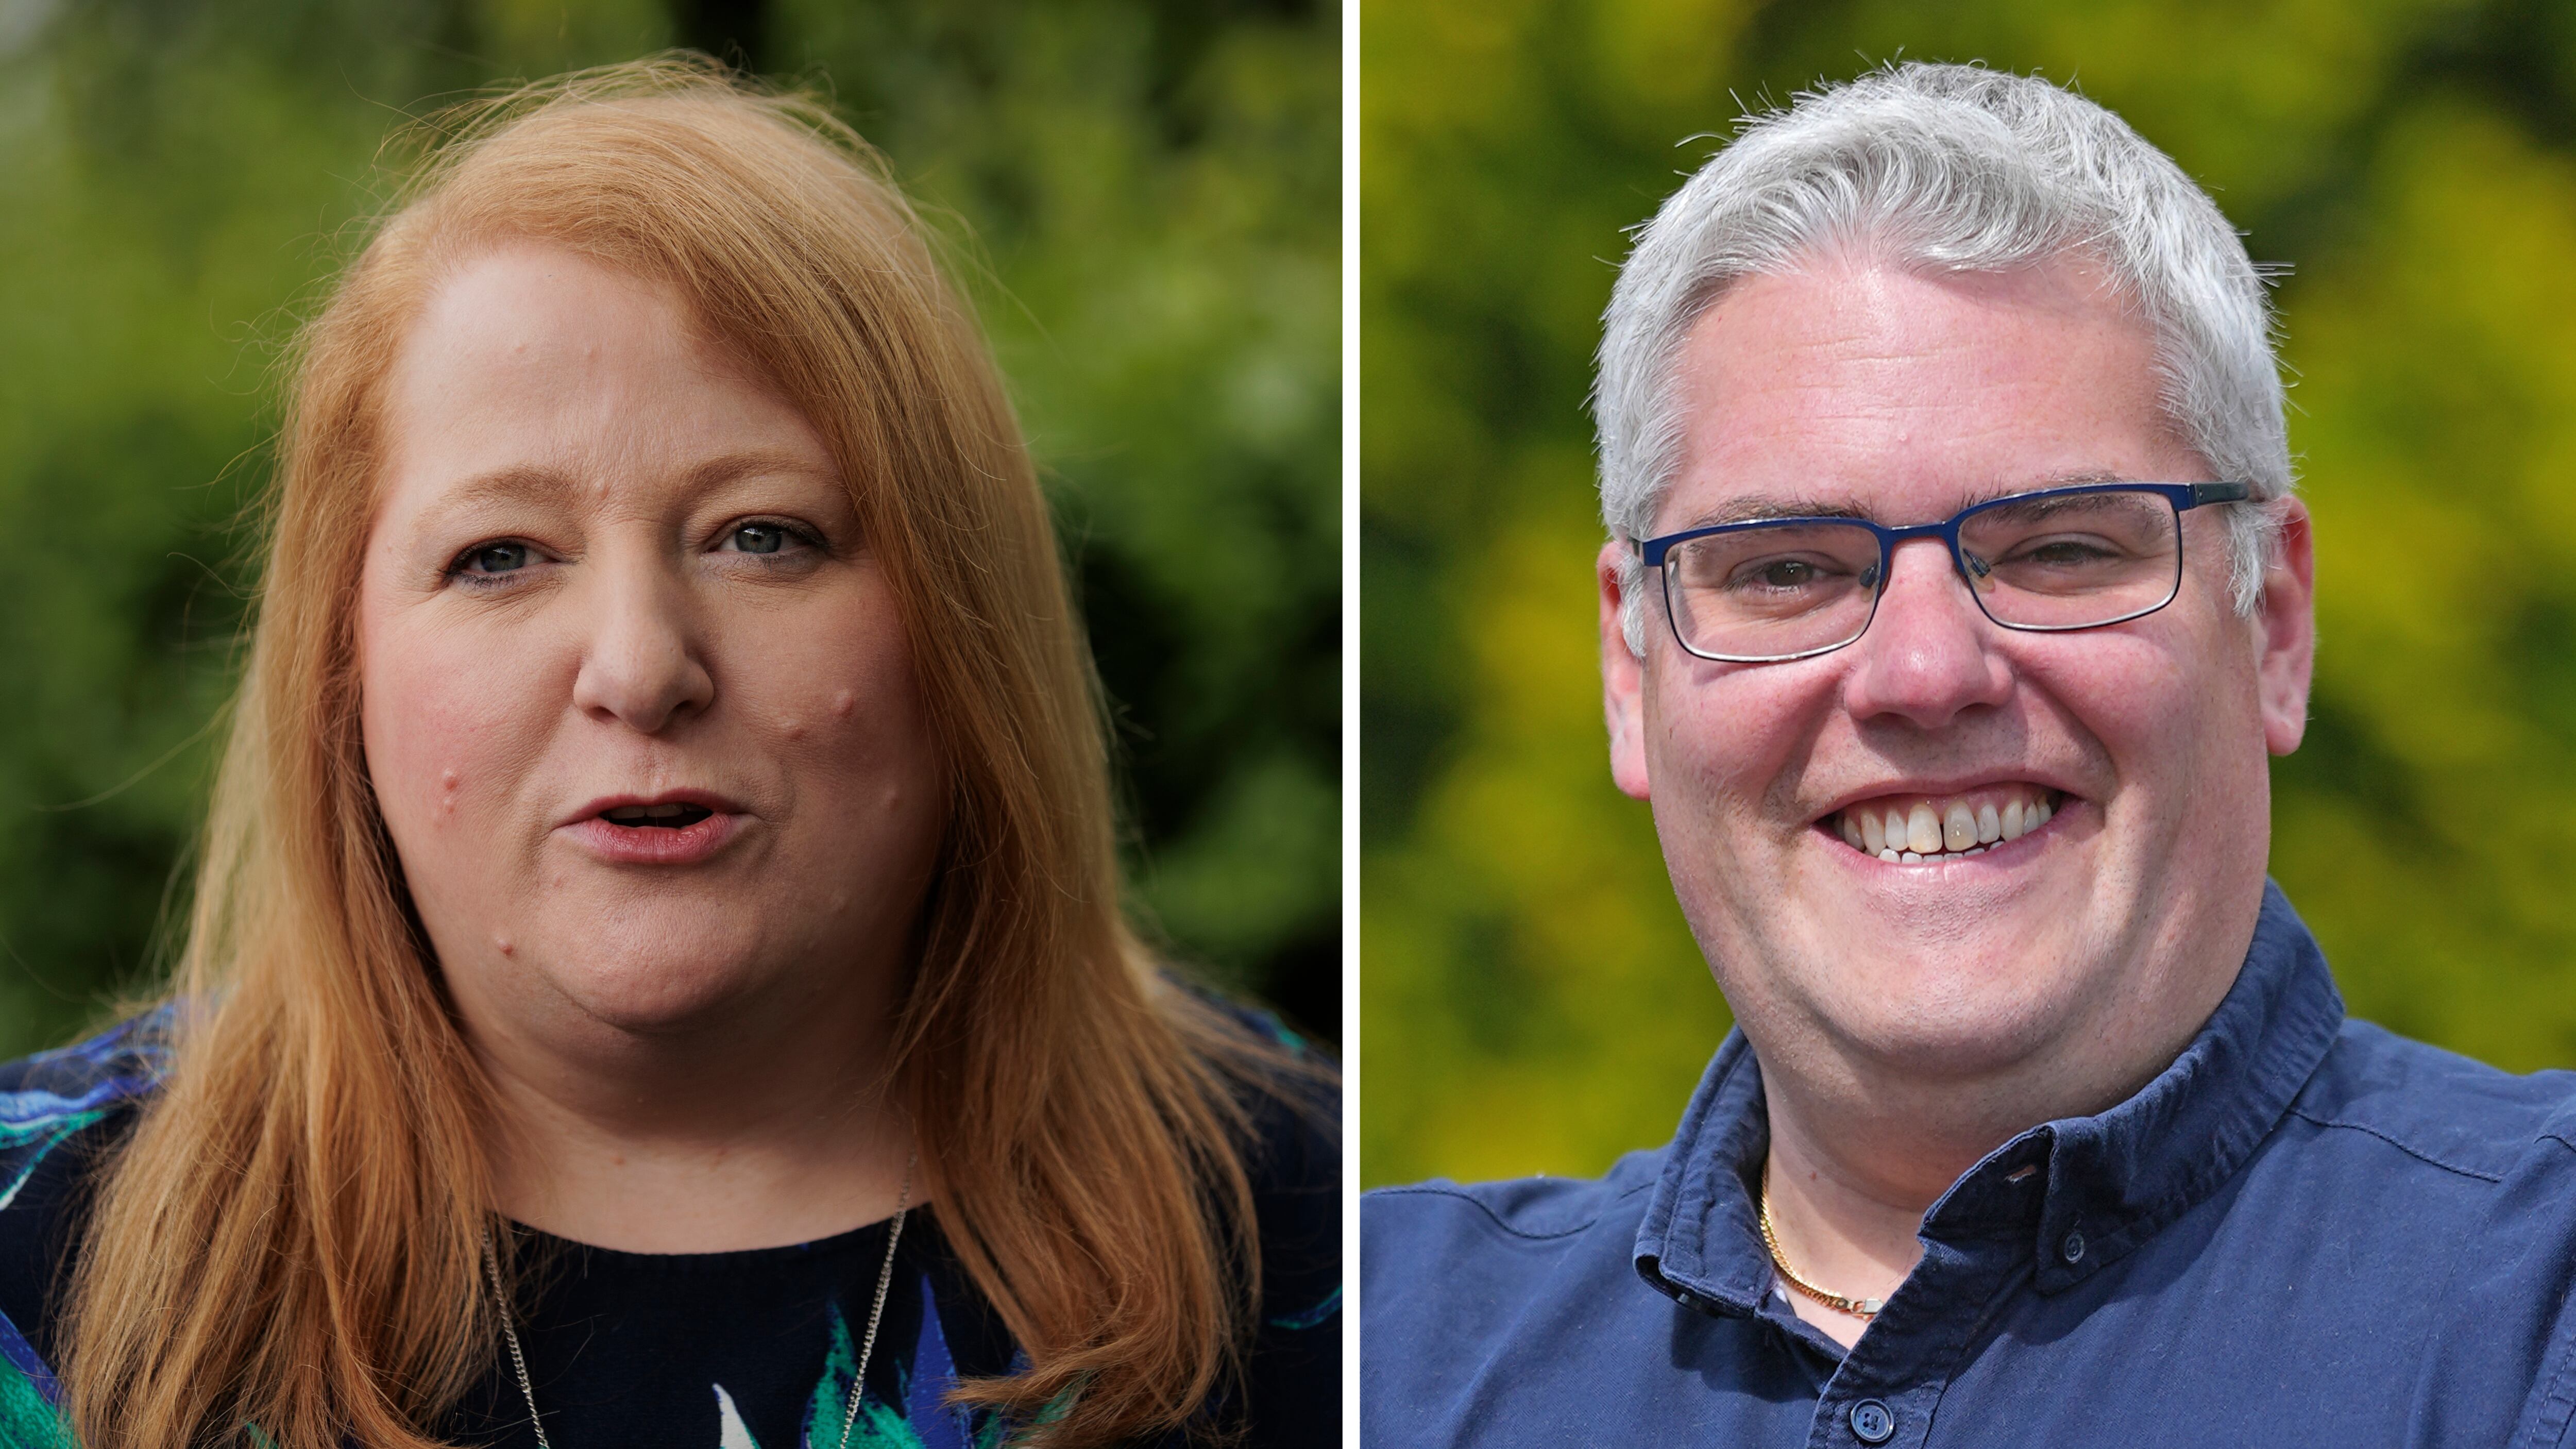 Alliance leader Naomi Long and DUP leader Gavin Robinson are both vying for the East Belfast seat in Thursday’s General Election